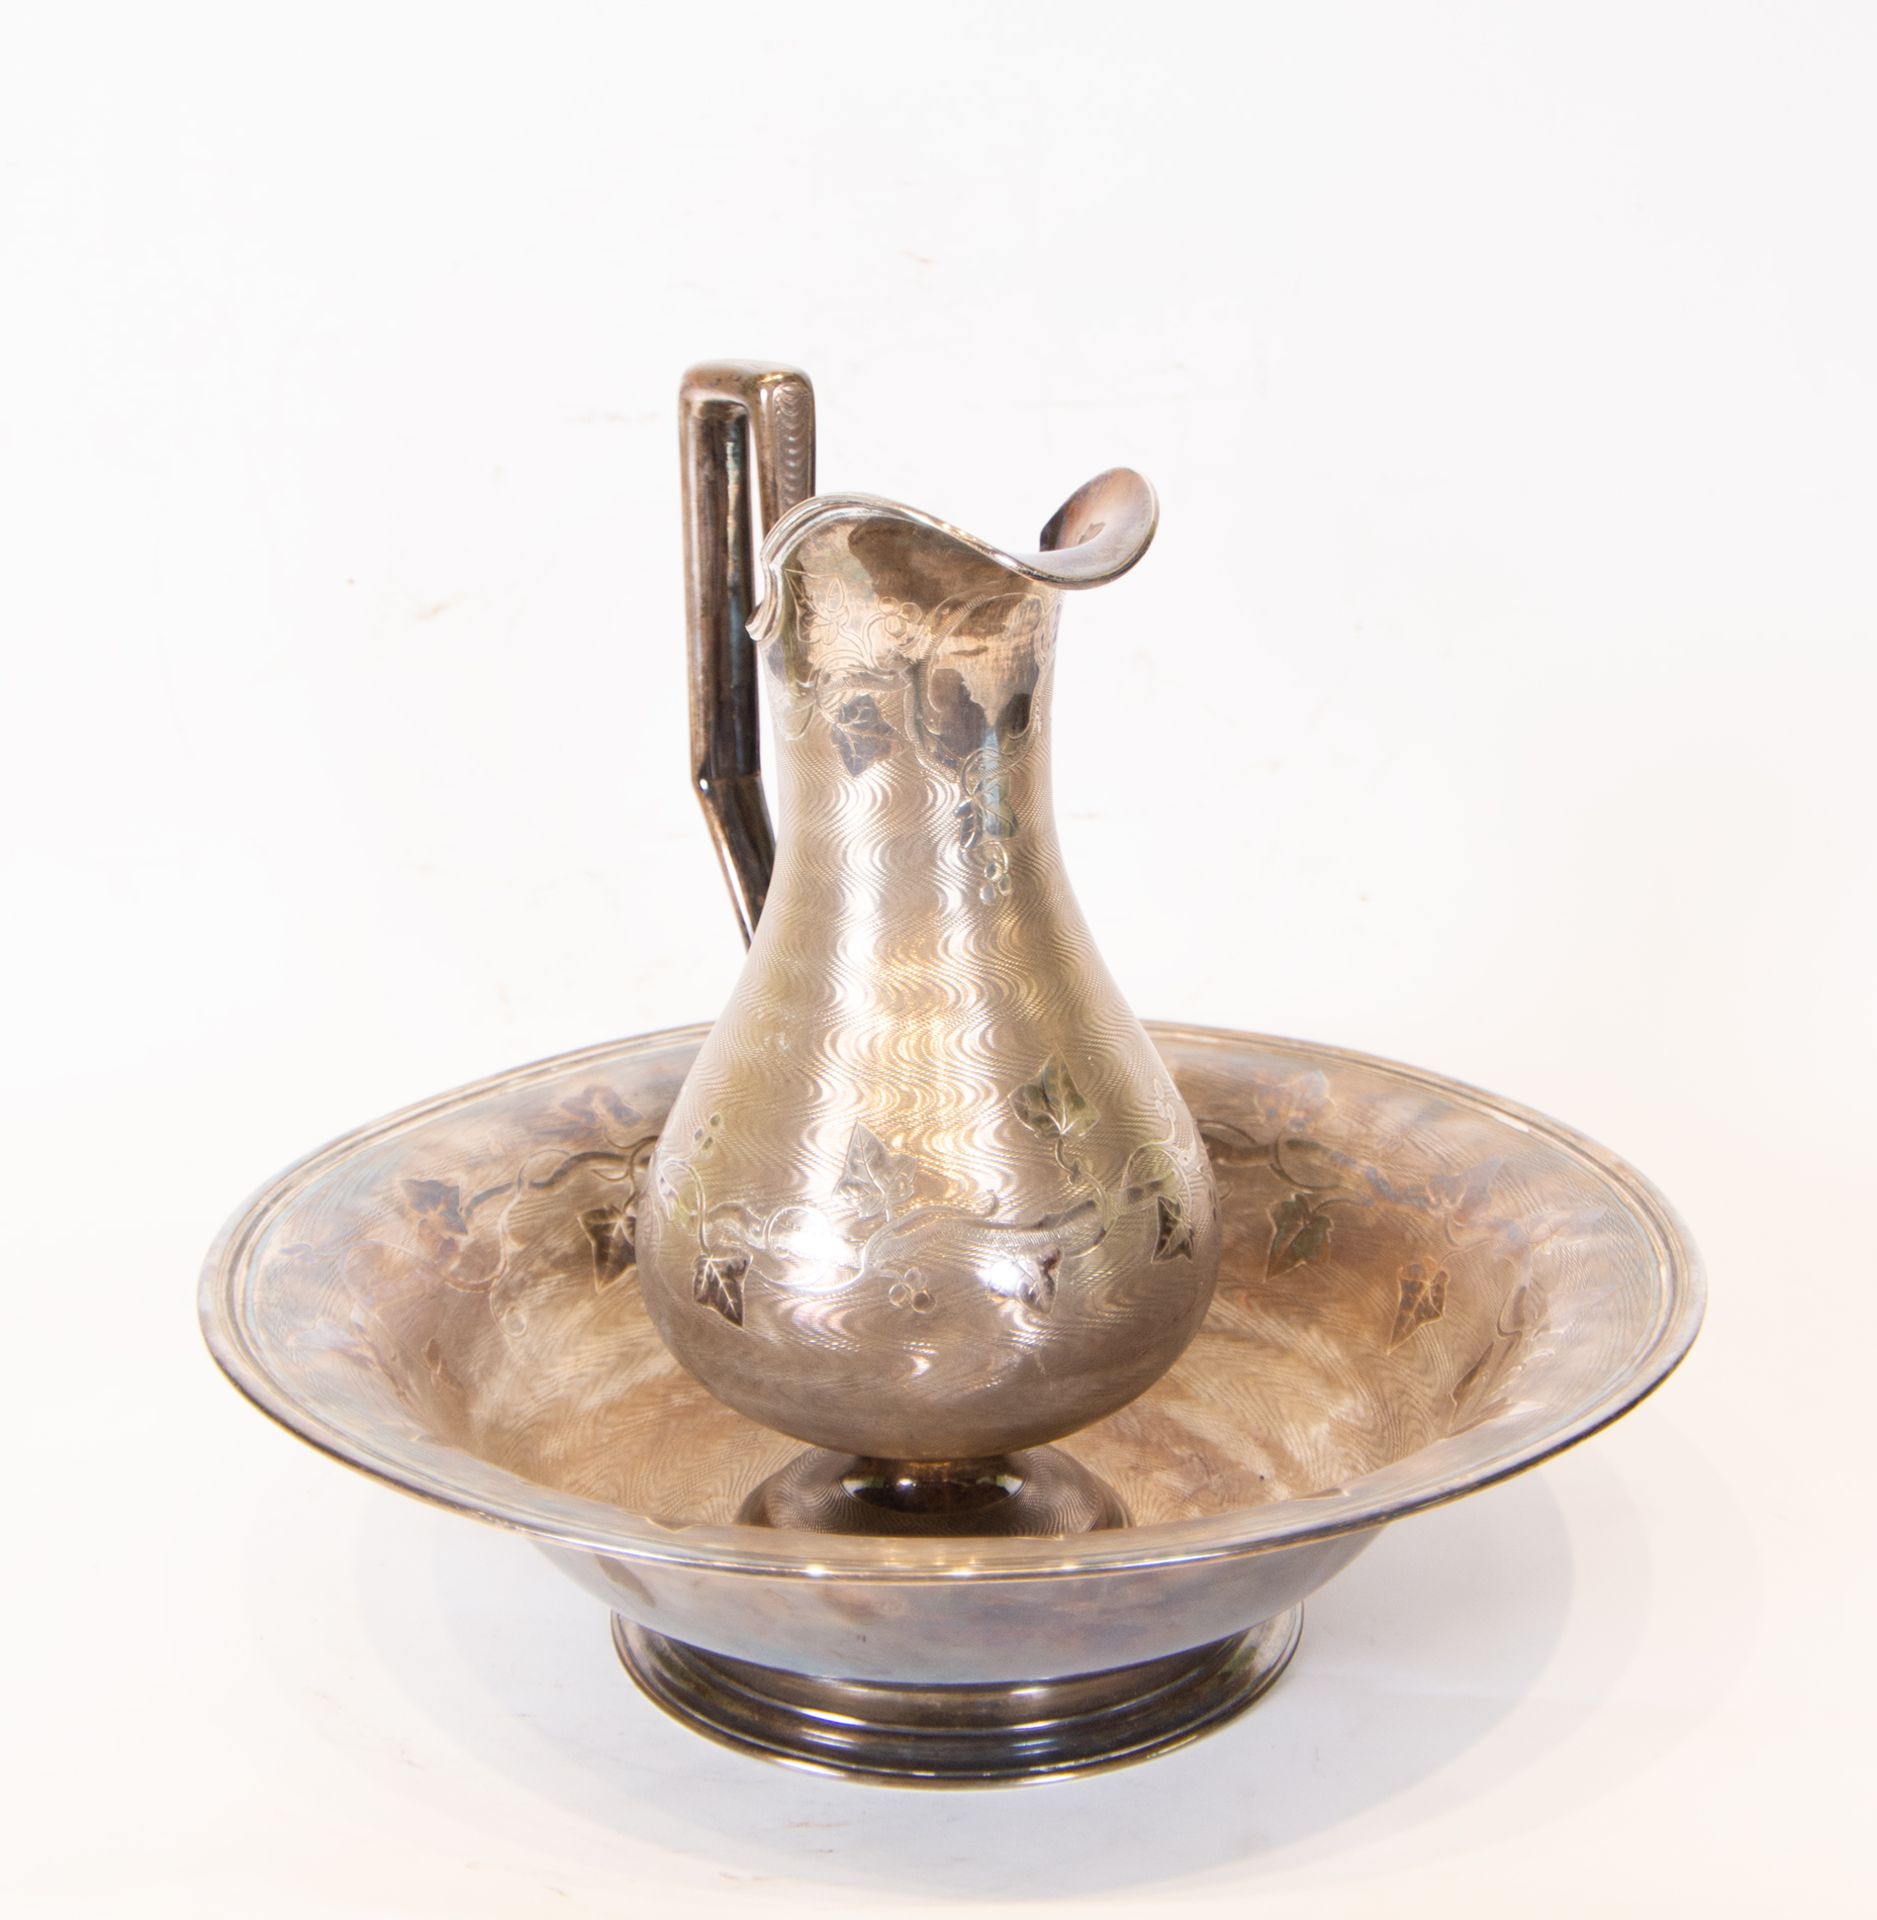 19th century basin with Bass Plate in sterling silver, 19th century Spanish school